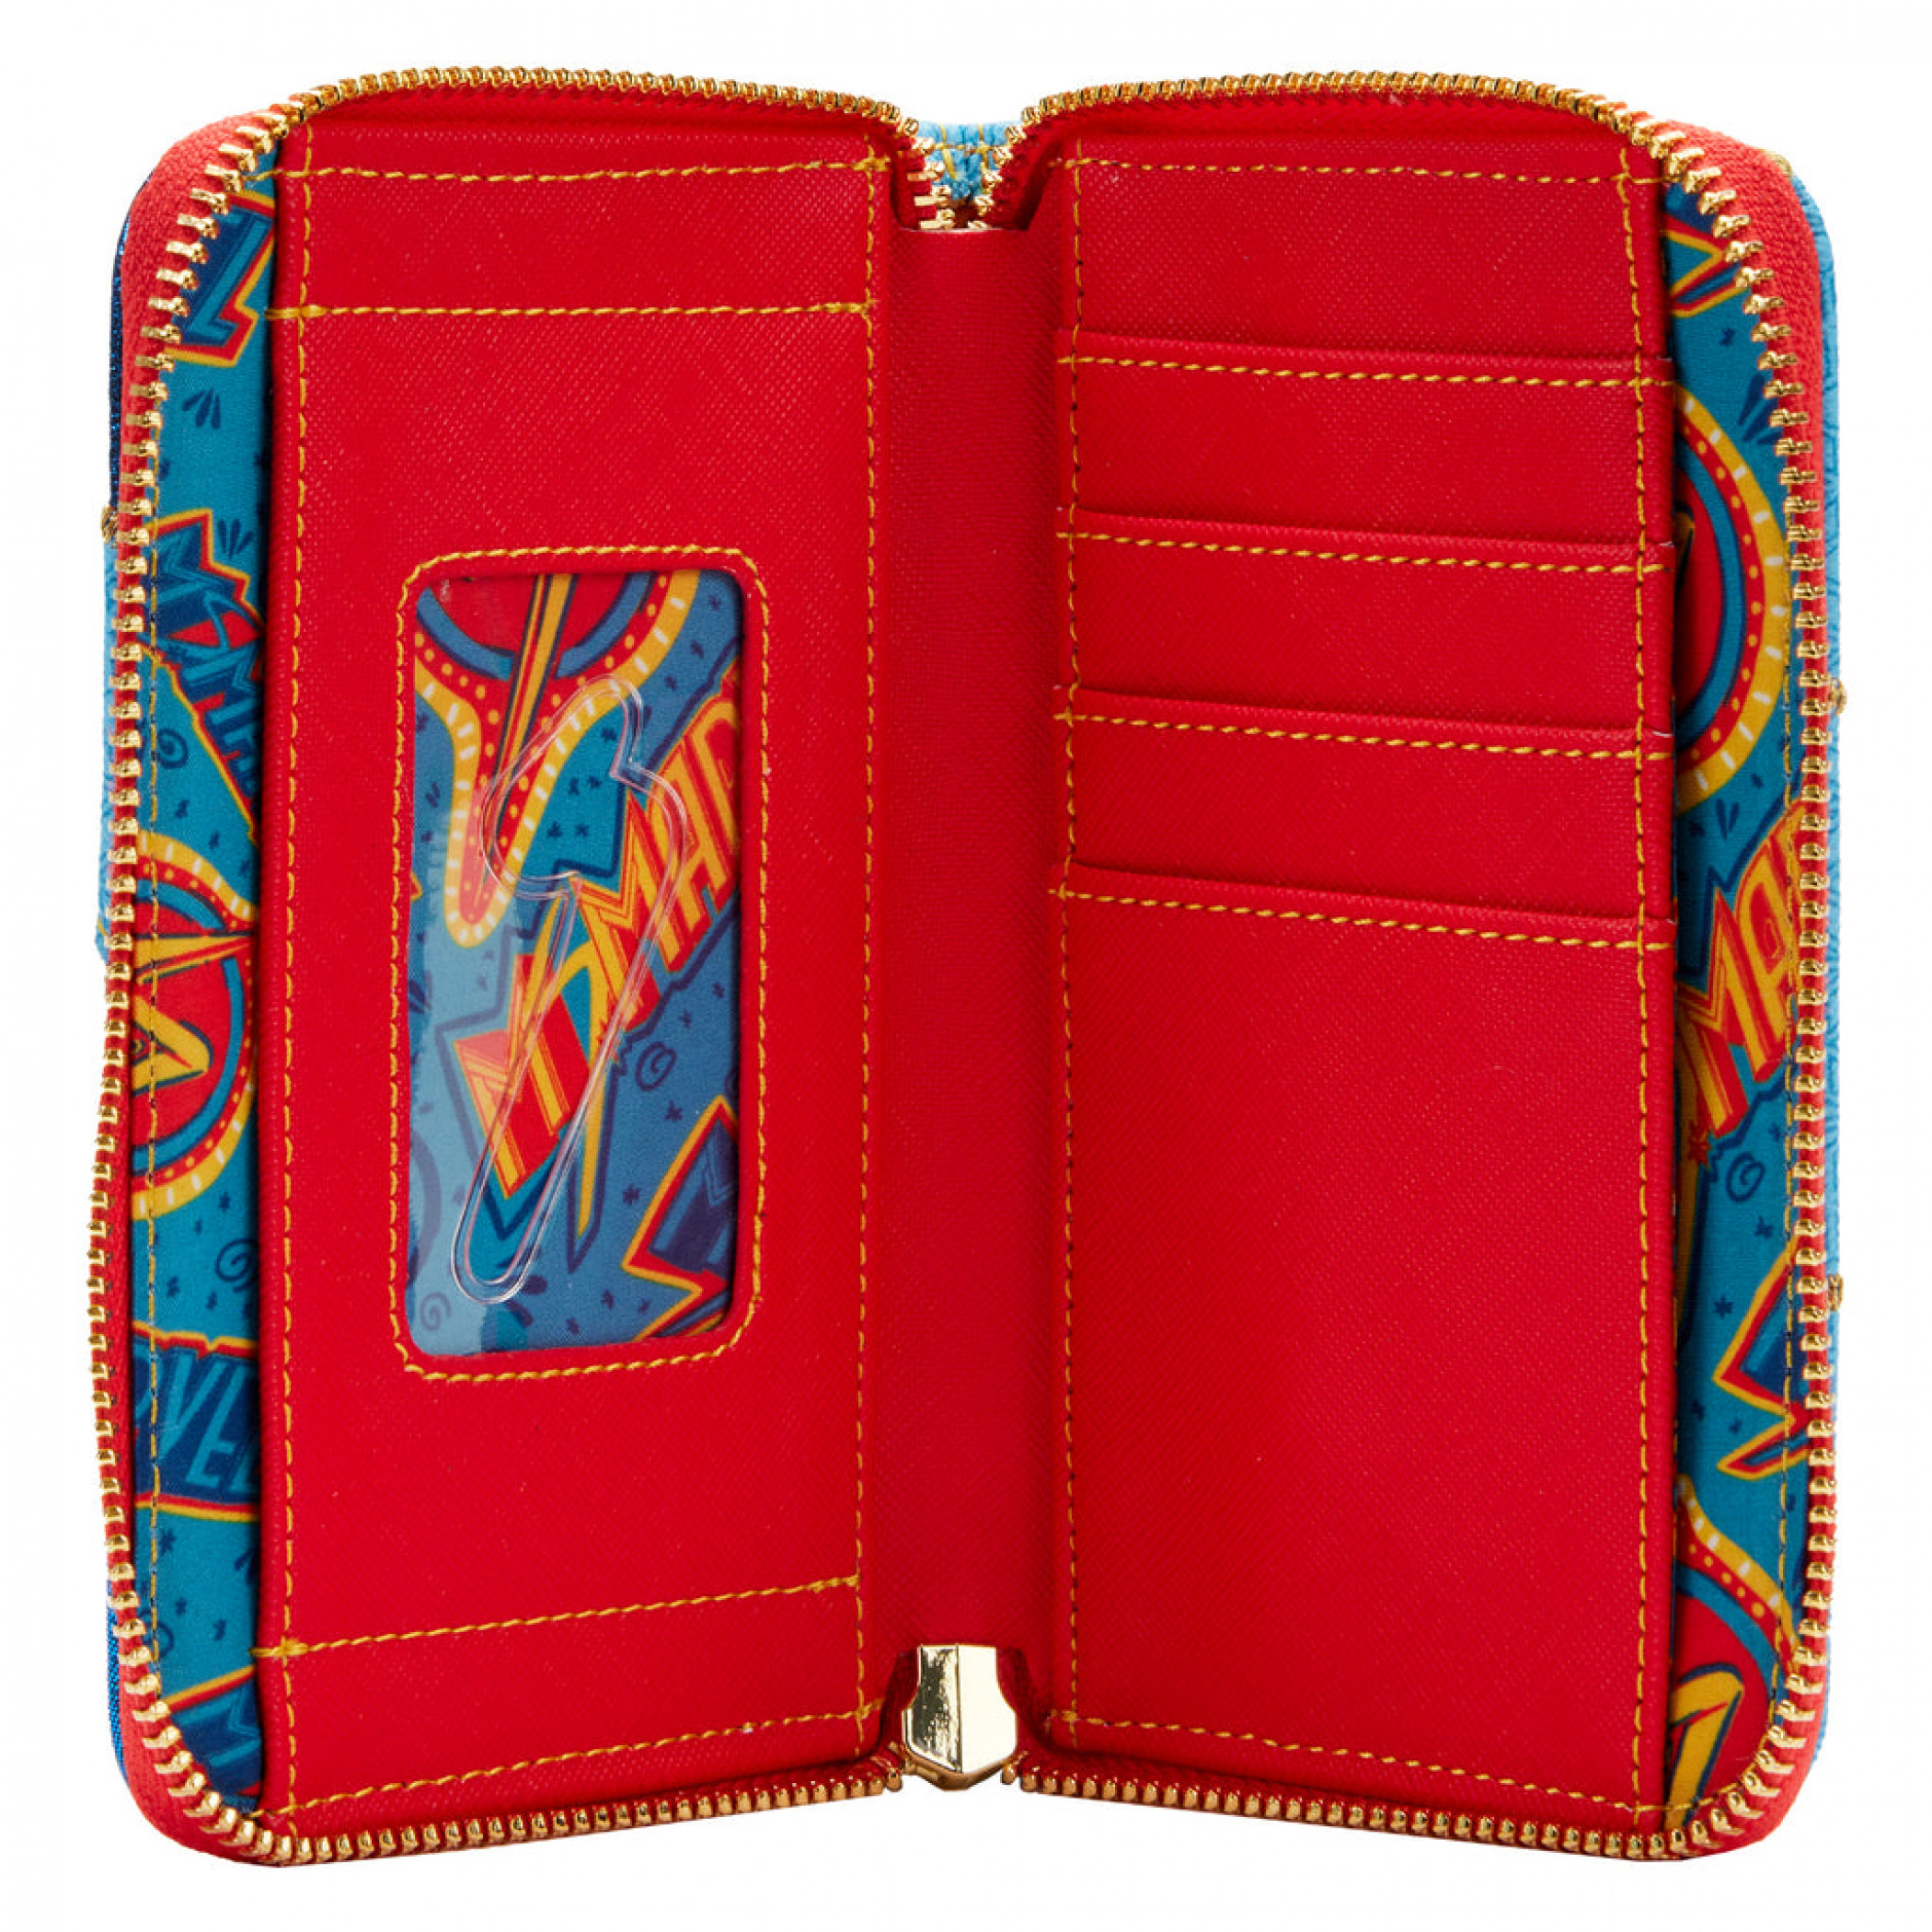 Ms. Marvel Cosplay Zip-Around Wallet from Loungefly